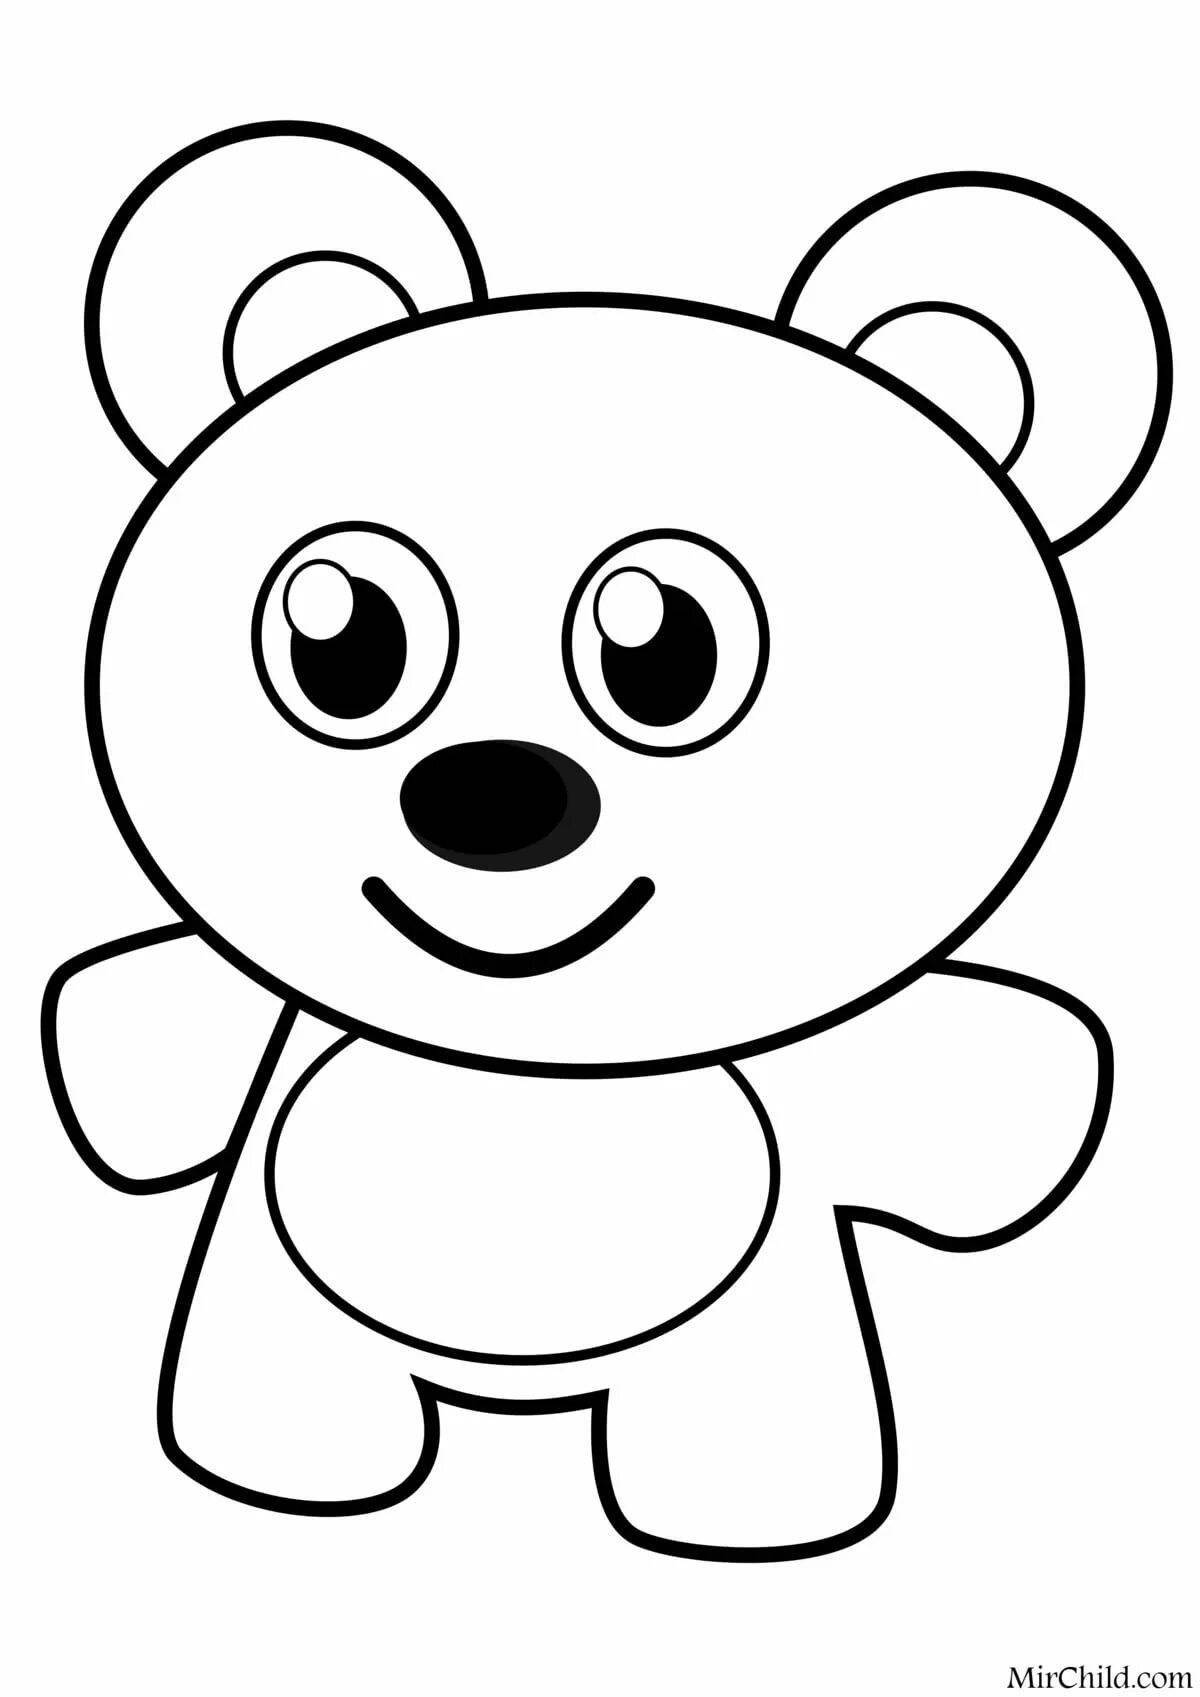 Colourful coloring book for toddler girls